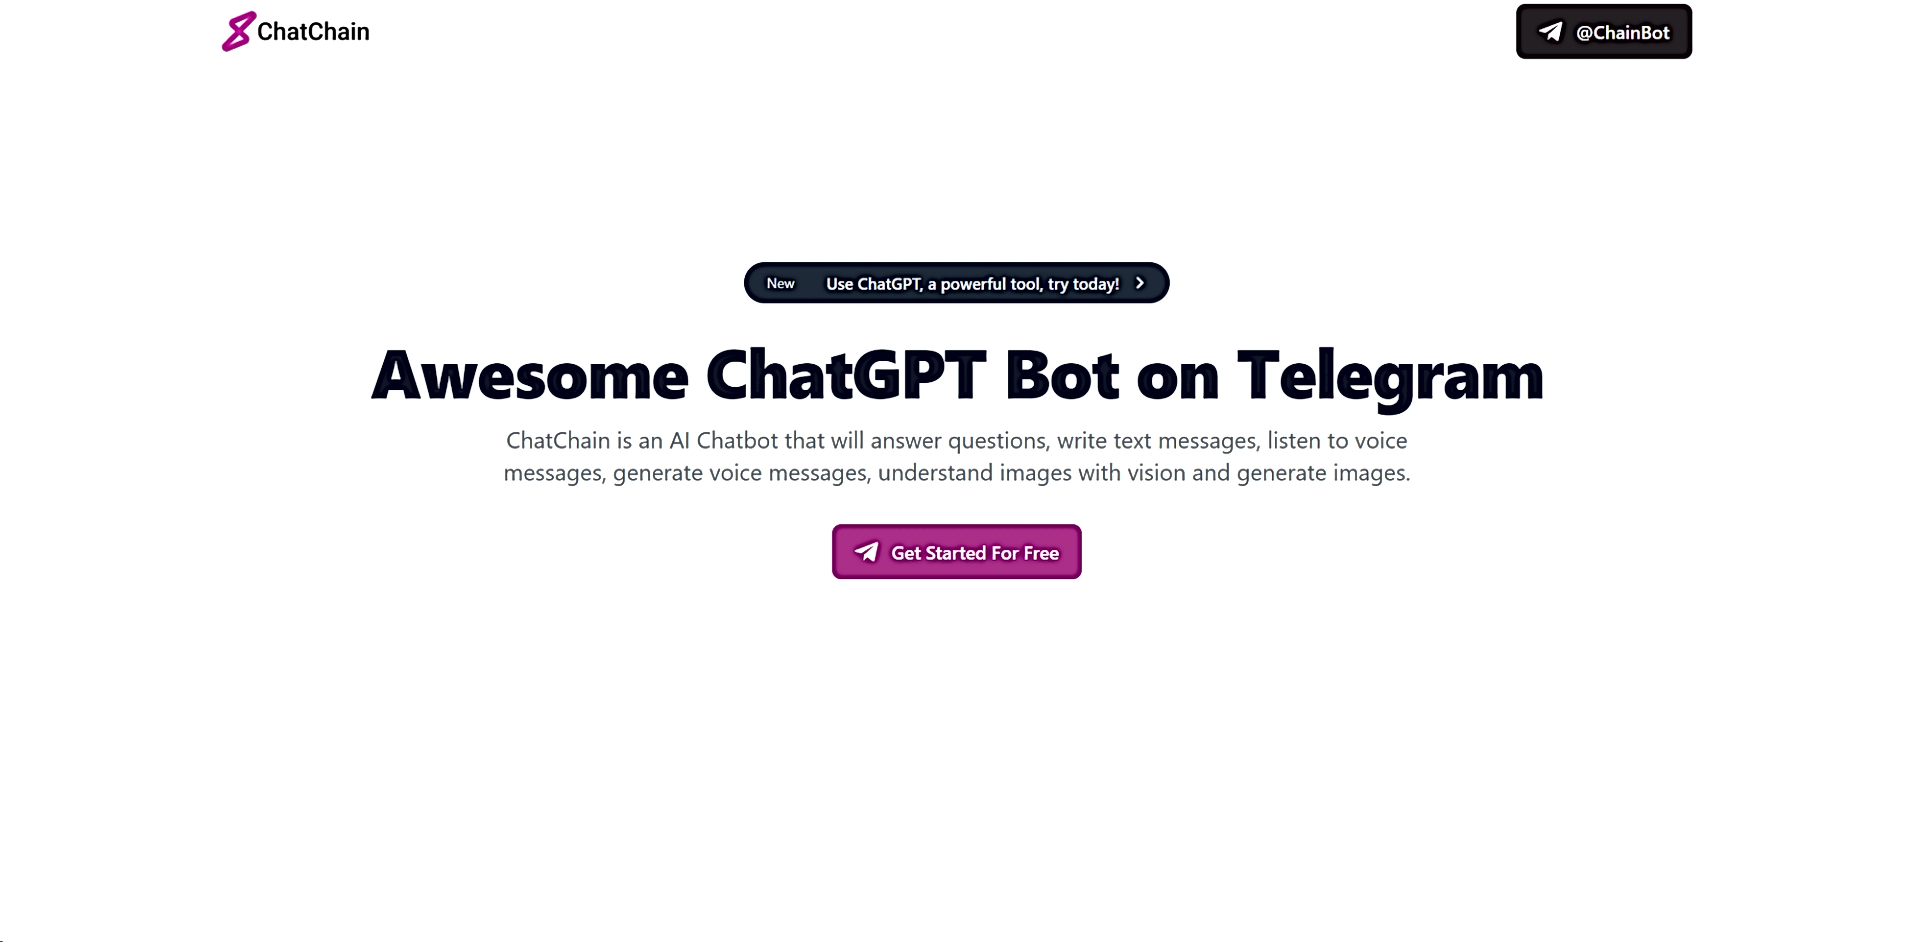 Chatchain featured